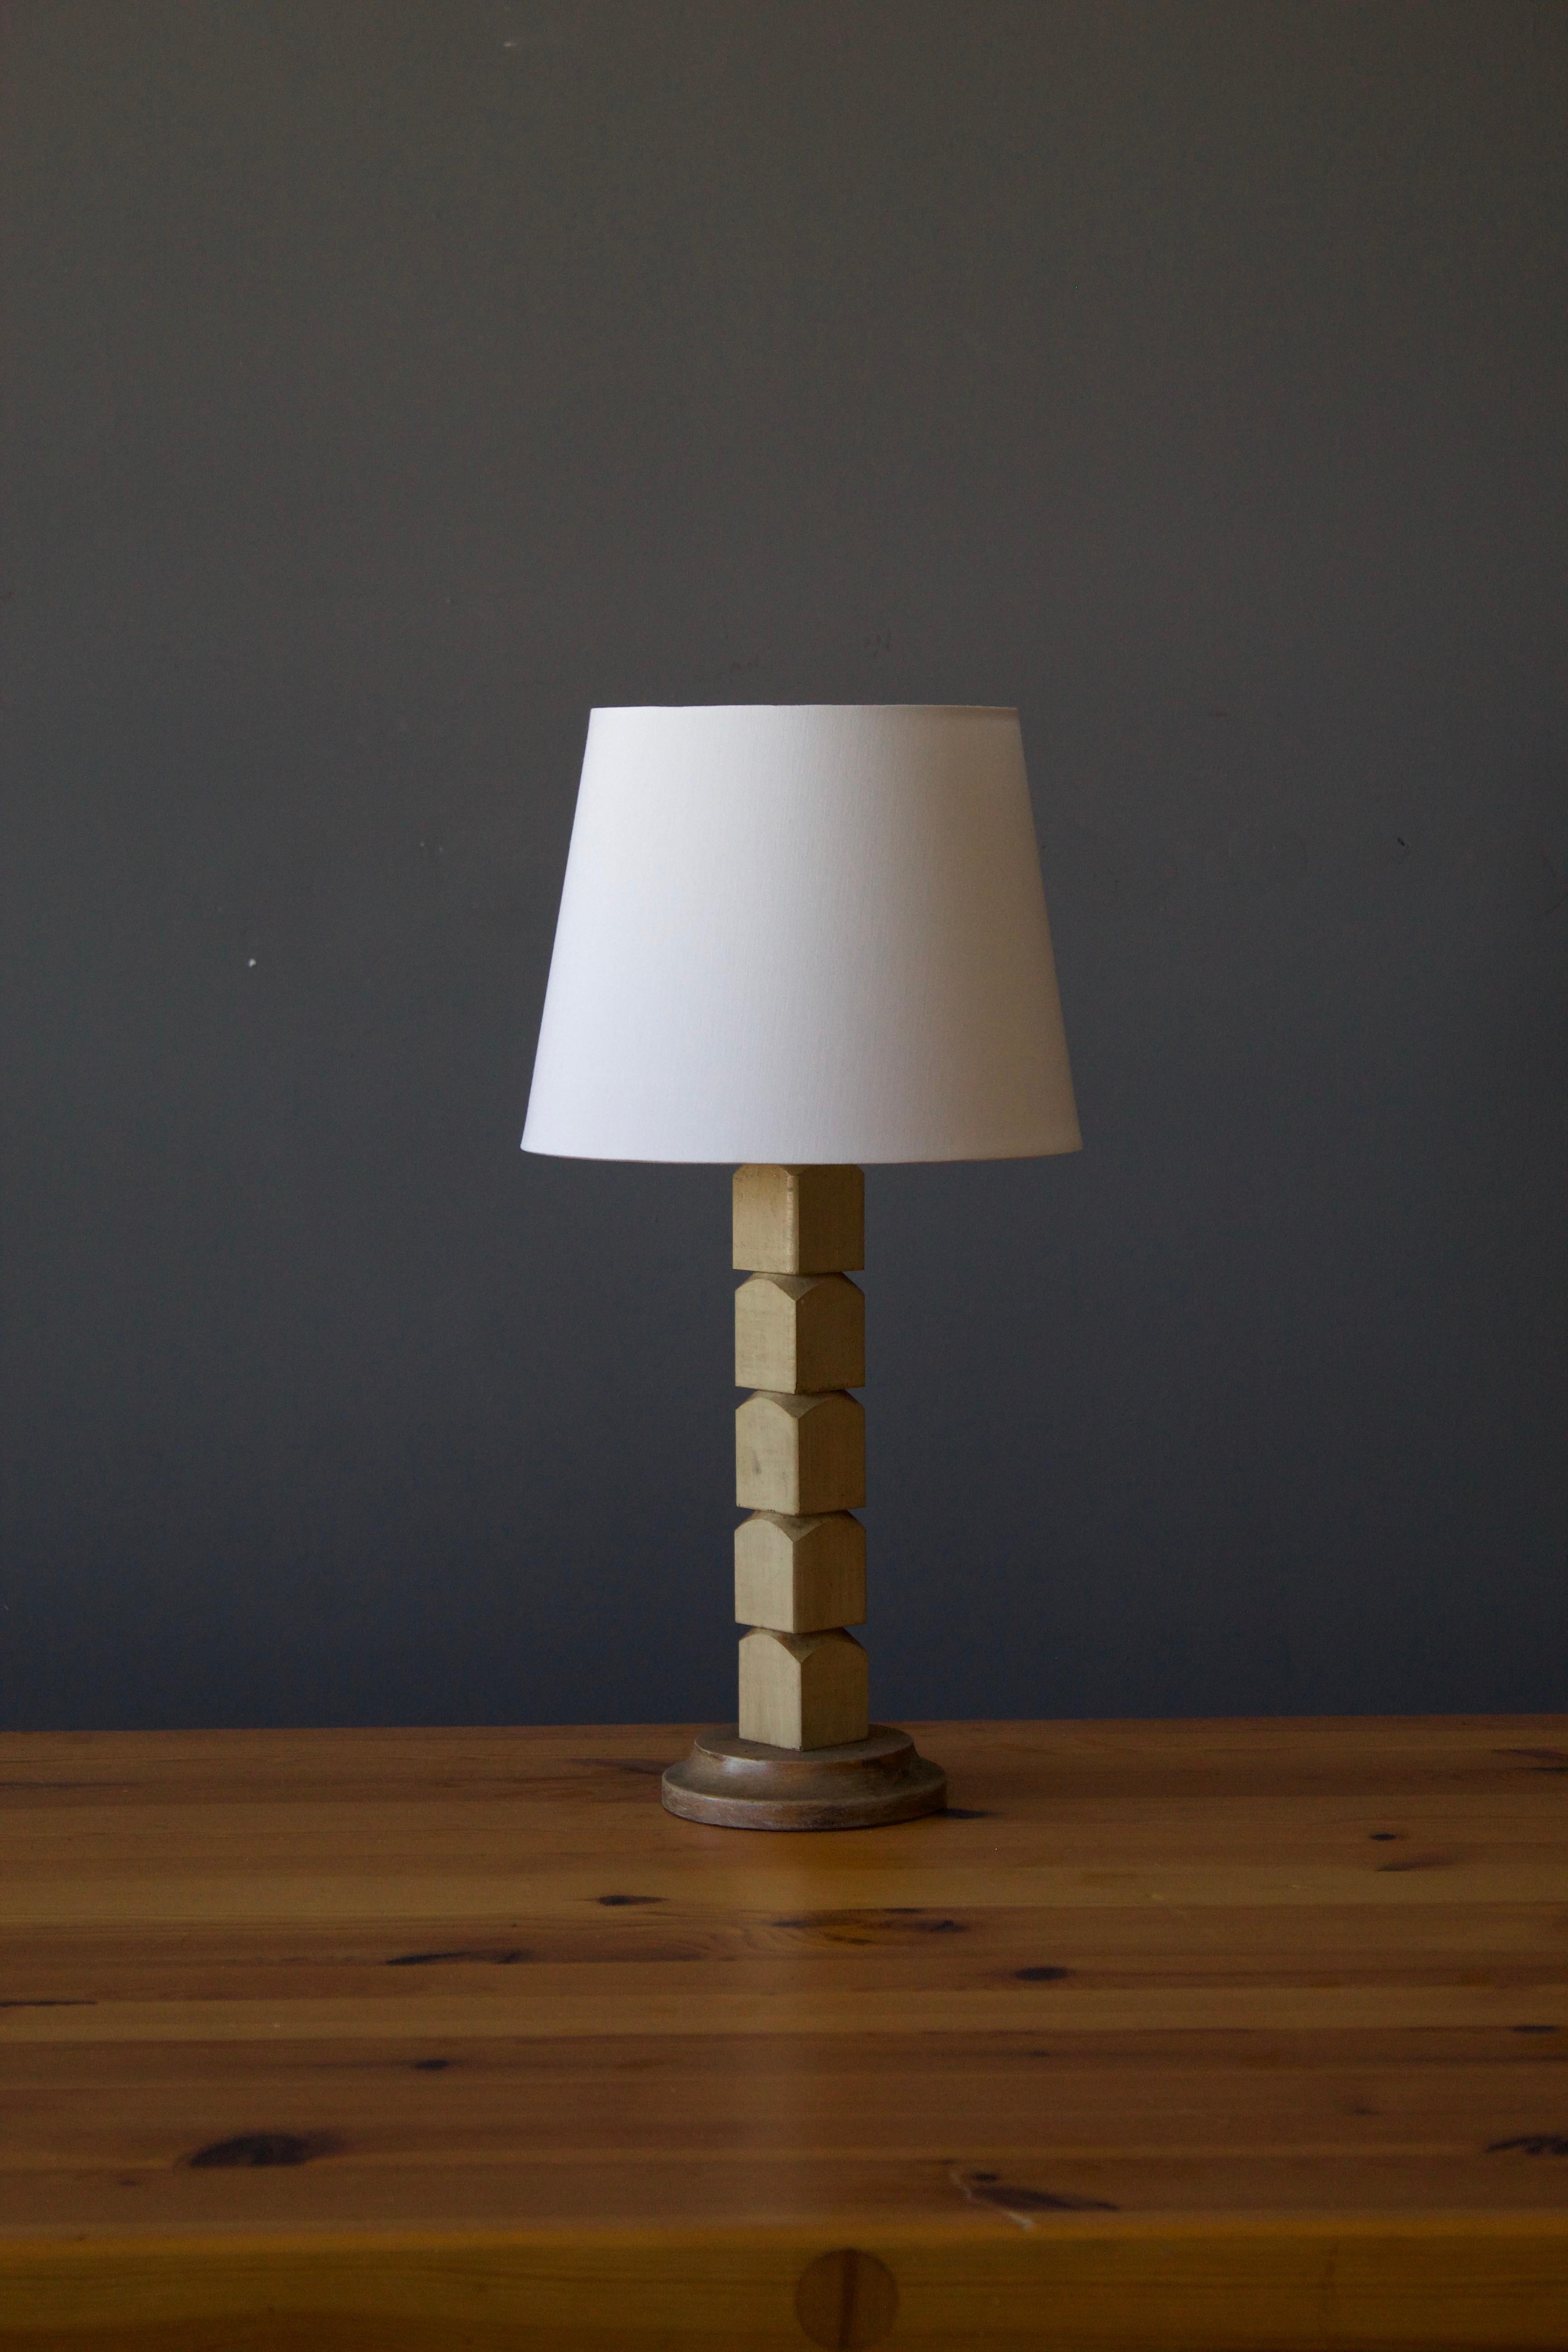 A table lamp. Designed and produced in America, c. 1950s. In solid cerused wood.

Sold without lampshade. Stated dimensions excluding bulbs and lampshade.

Other designers of the period include Alexandre Knoll, George Nakashima, Isamu Noguchi,